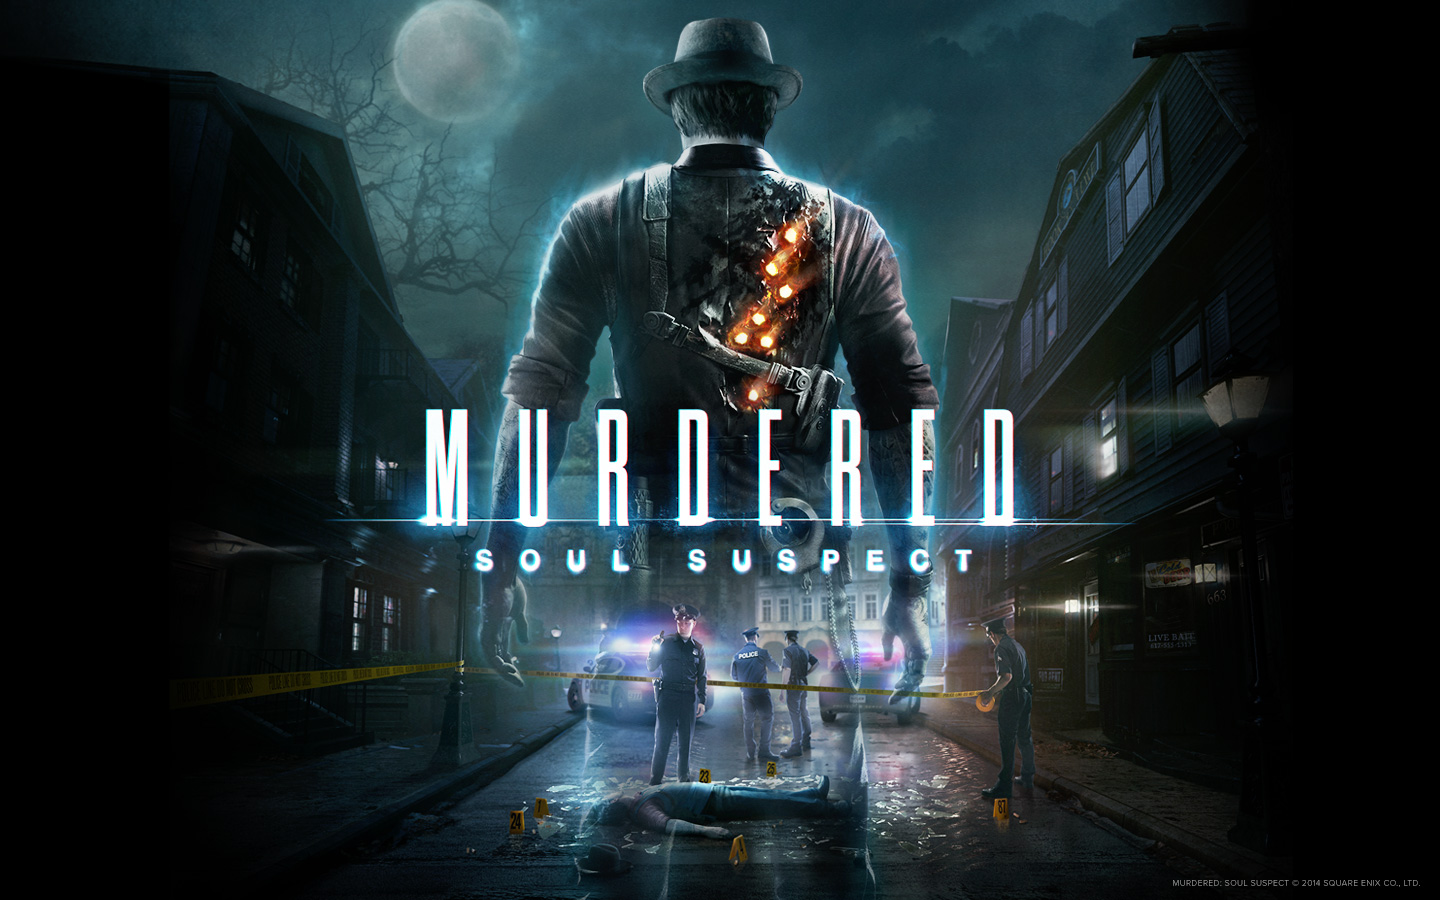 Get your murdered soul suspect wallpapers from here â square portal